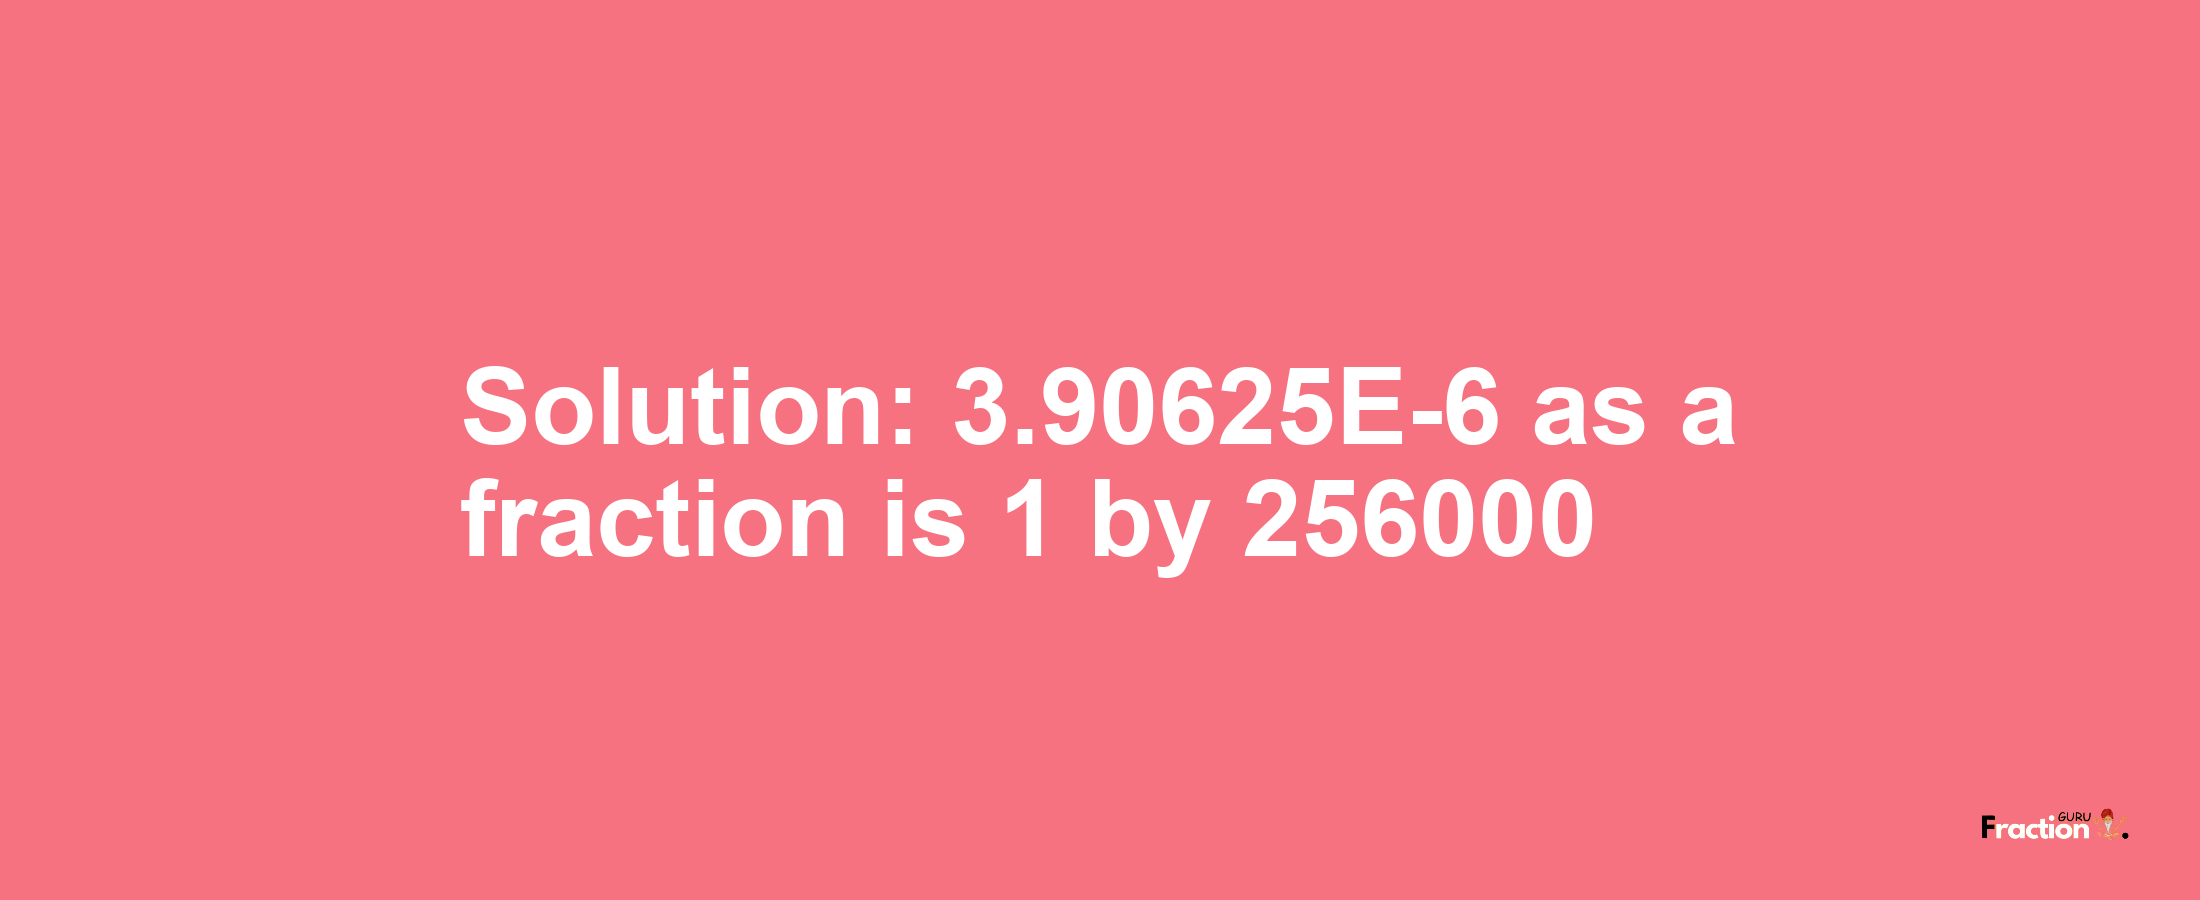 Solution:3.90625E-6 as a fraction is 1/256000